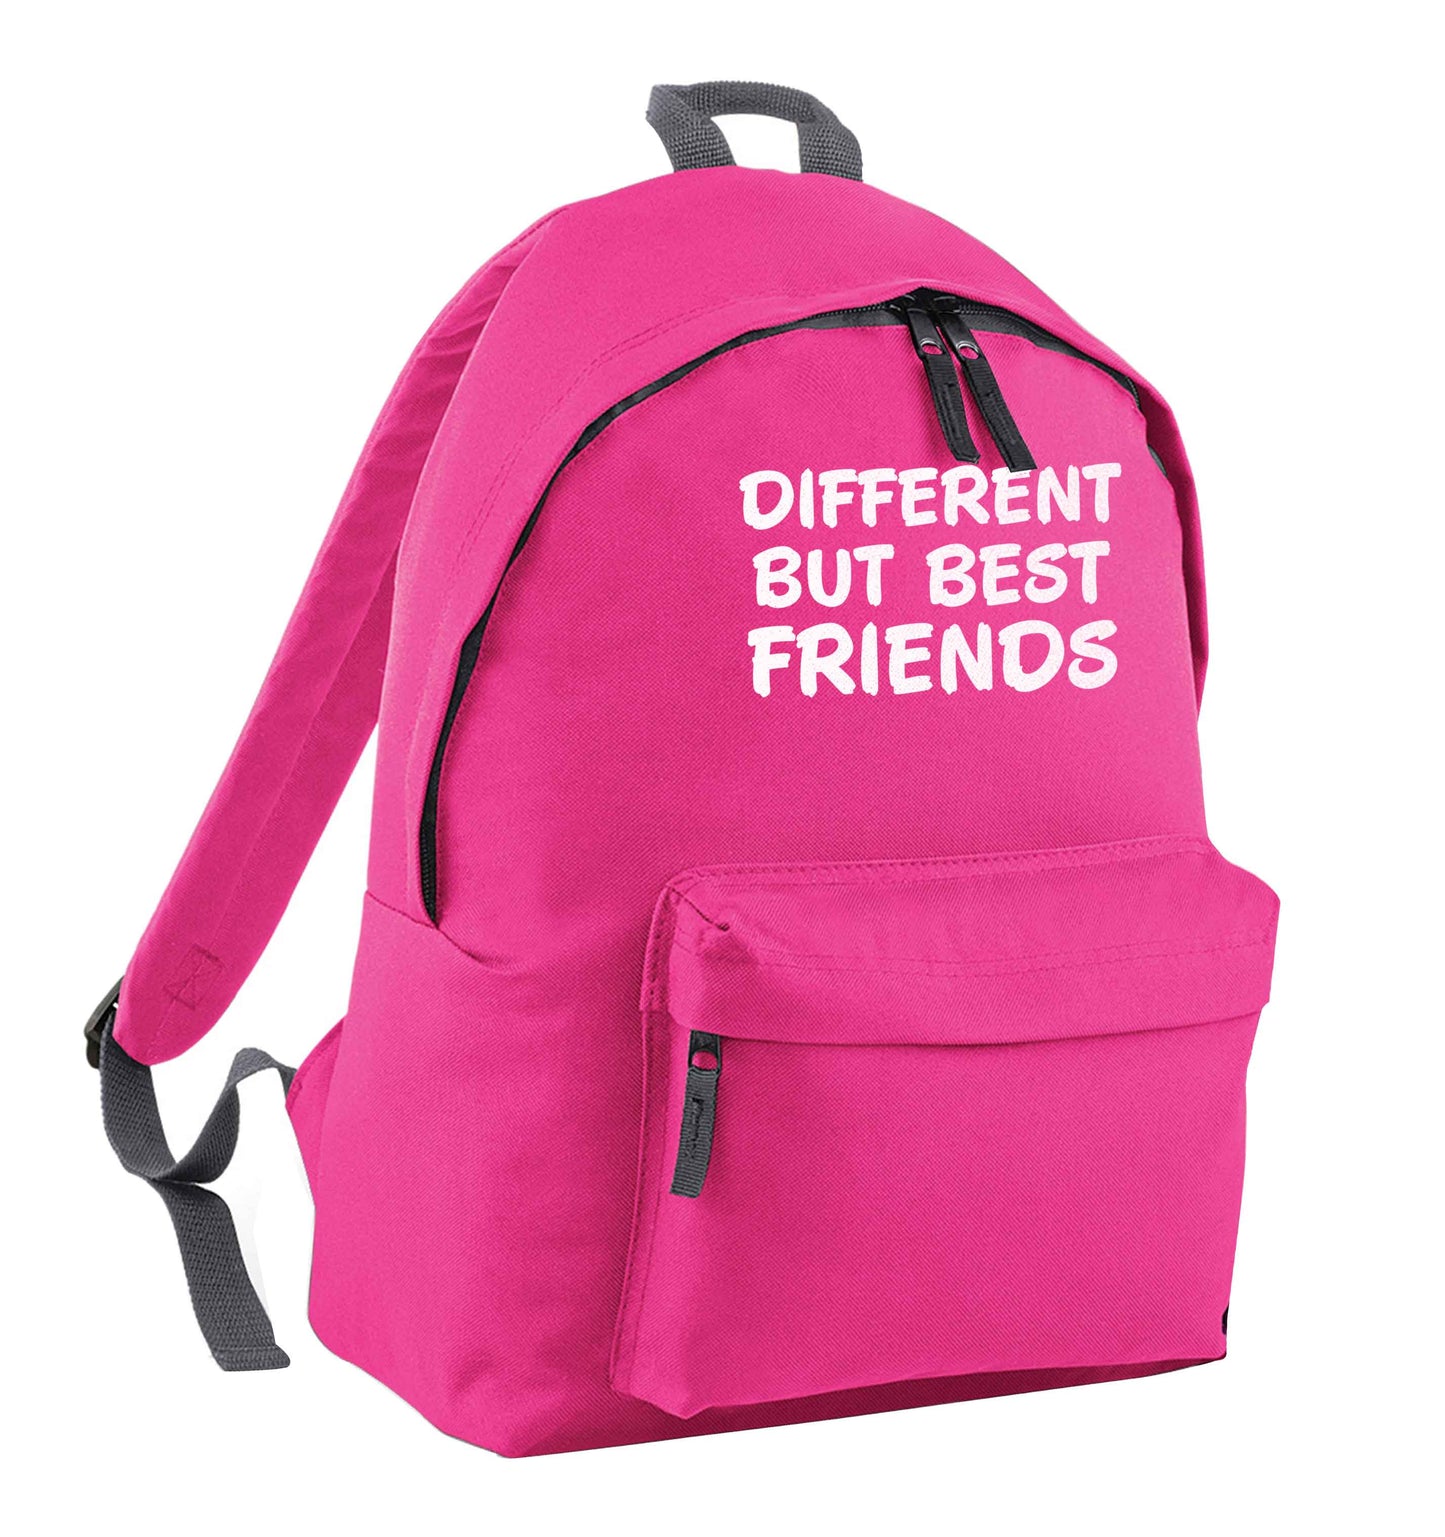 Different but best friends pink children's backpack